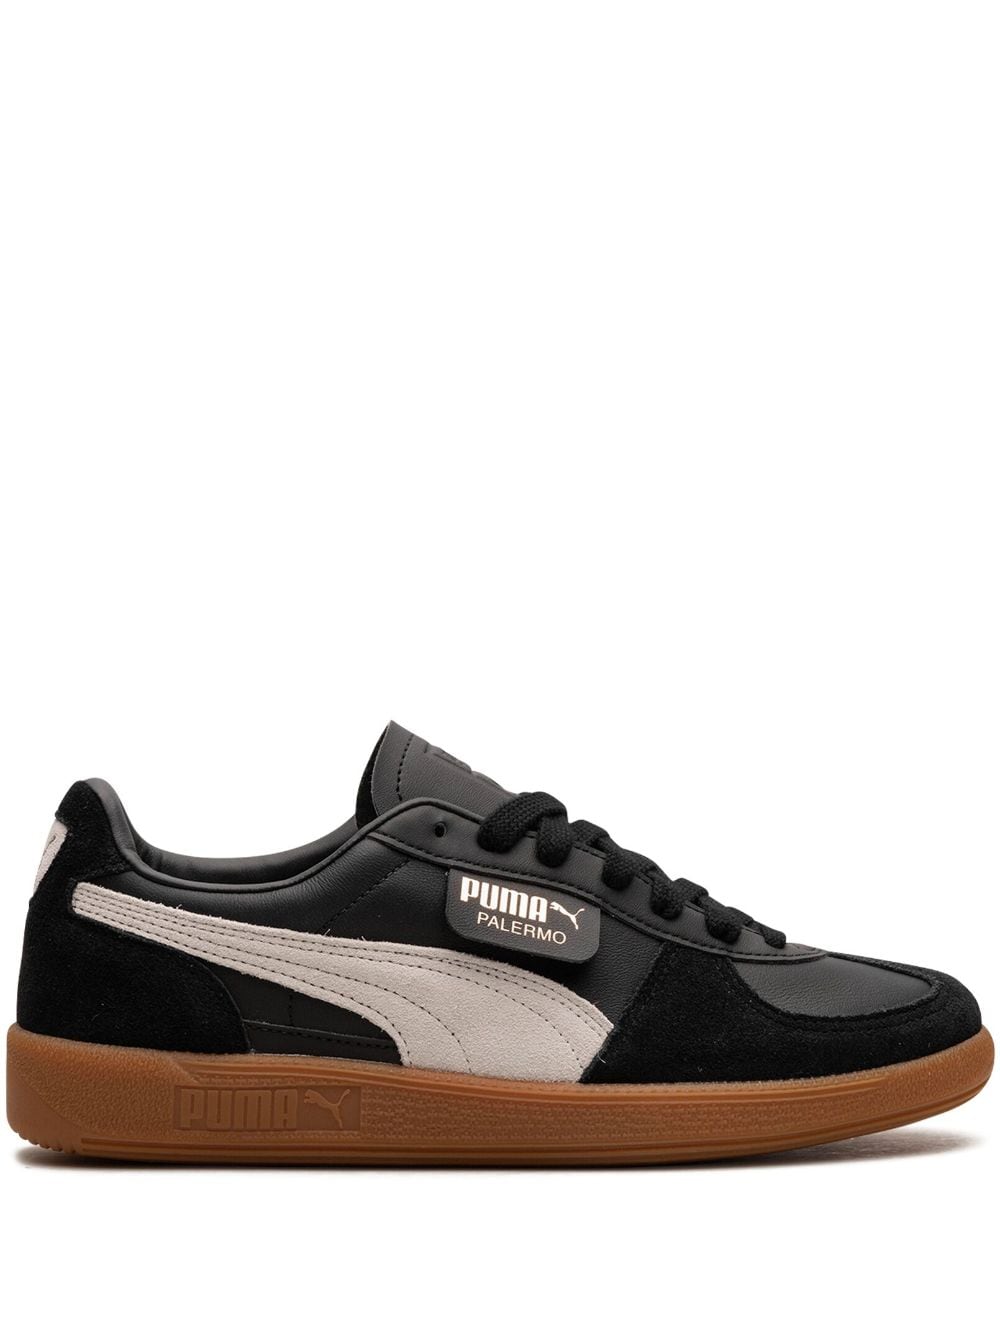 Puma Palermo " Black/feather Gray/gum" Sneakers